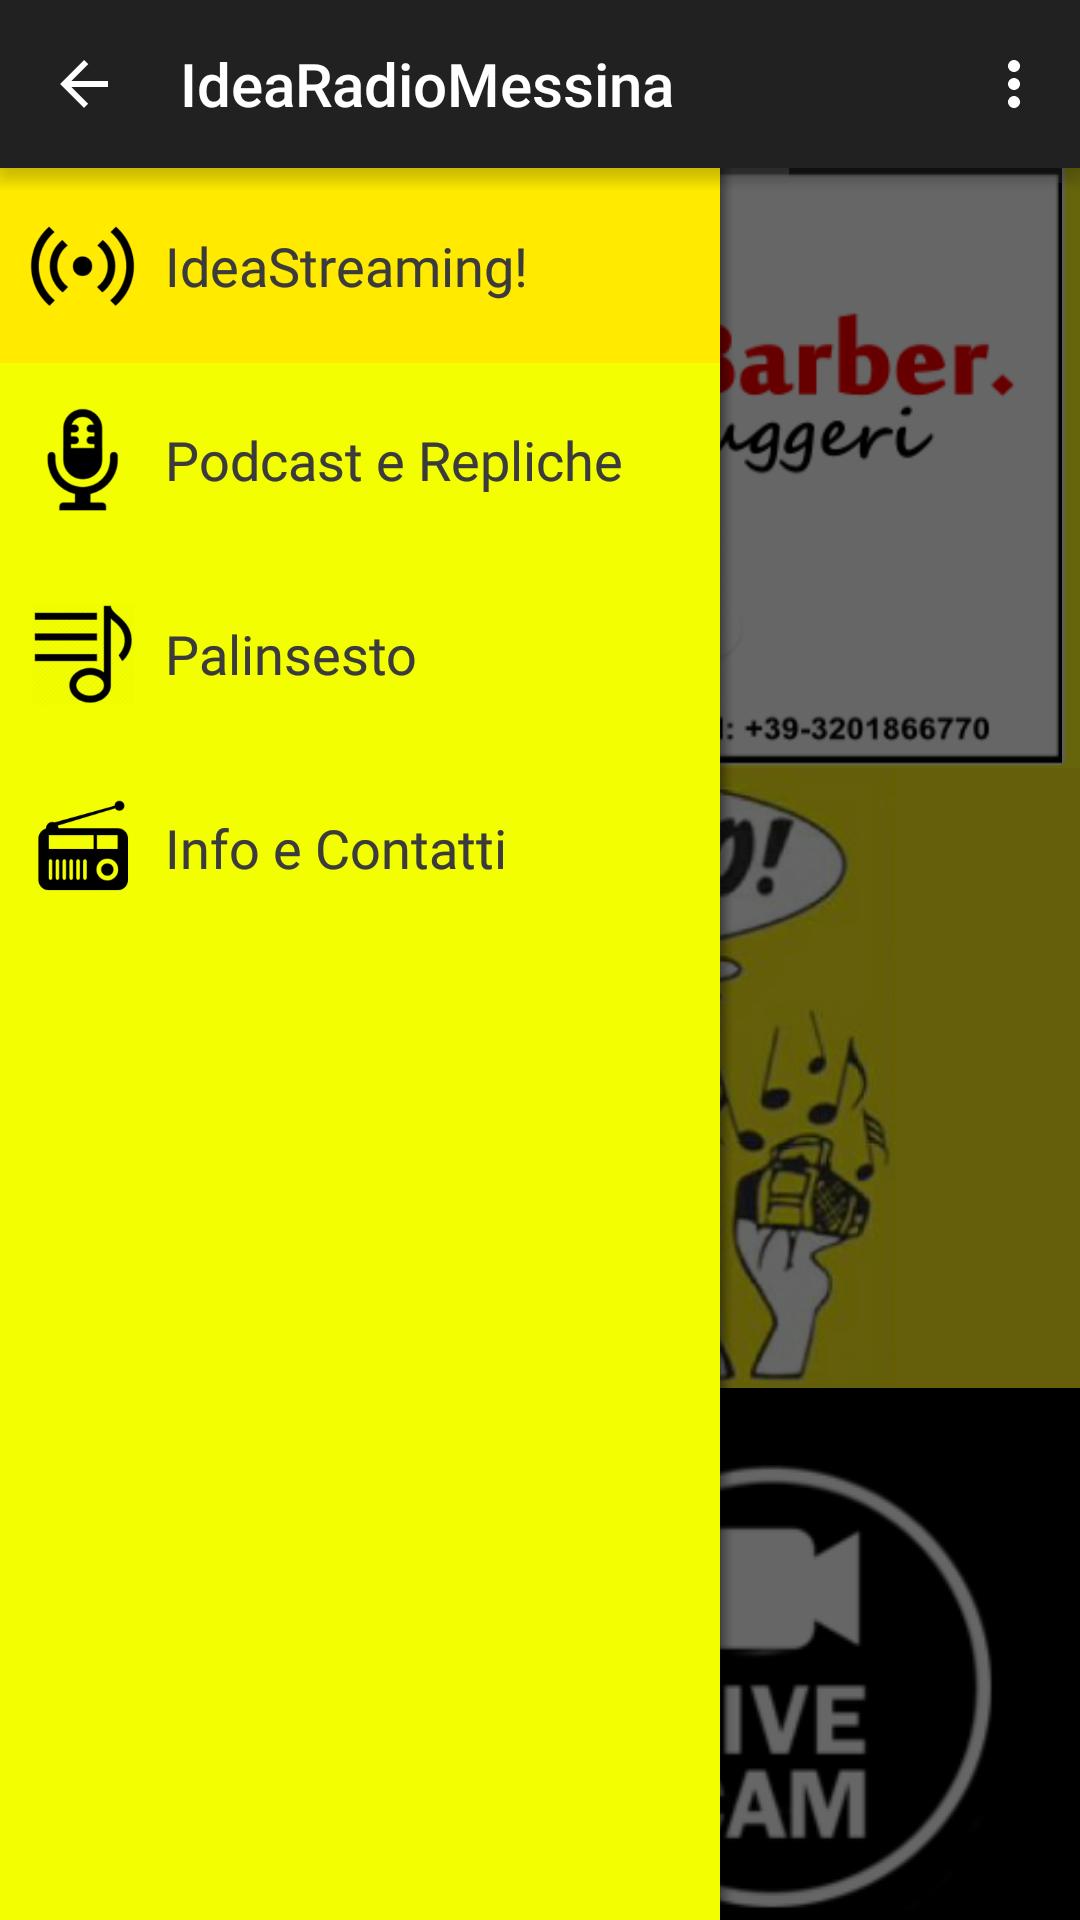 Idea Radio Messina for Android - APK Download